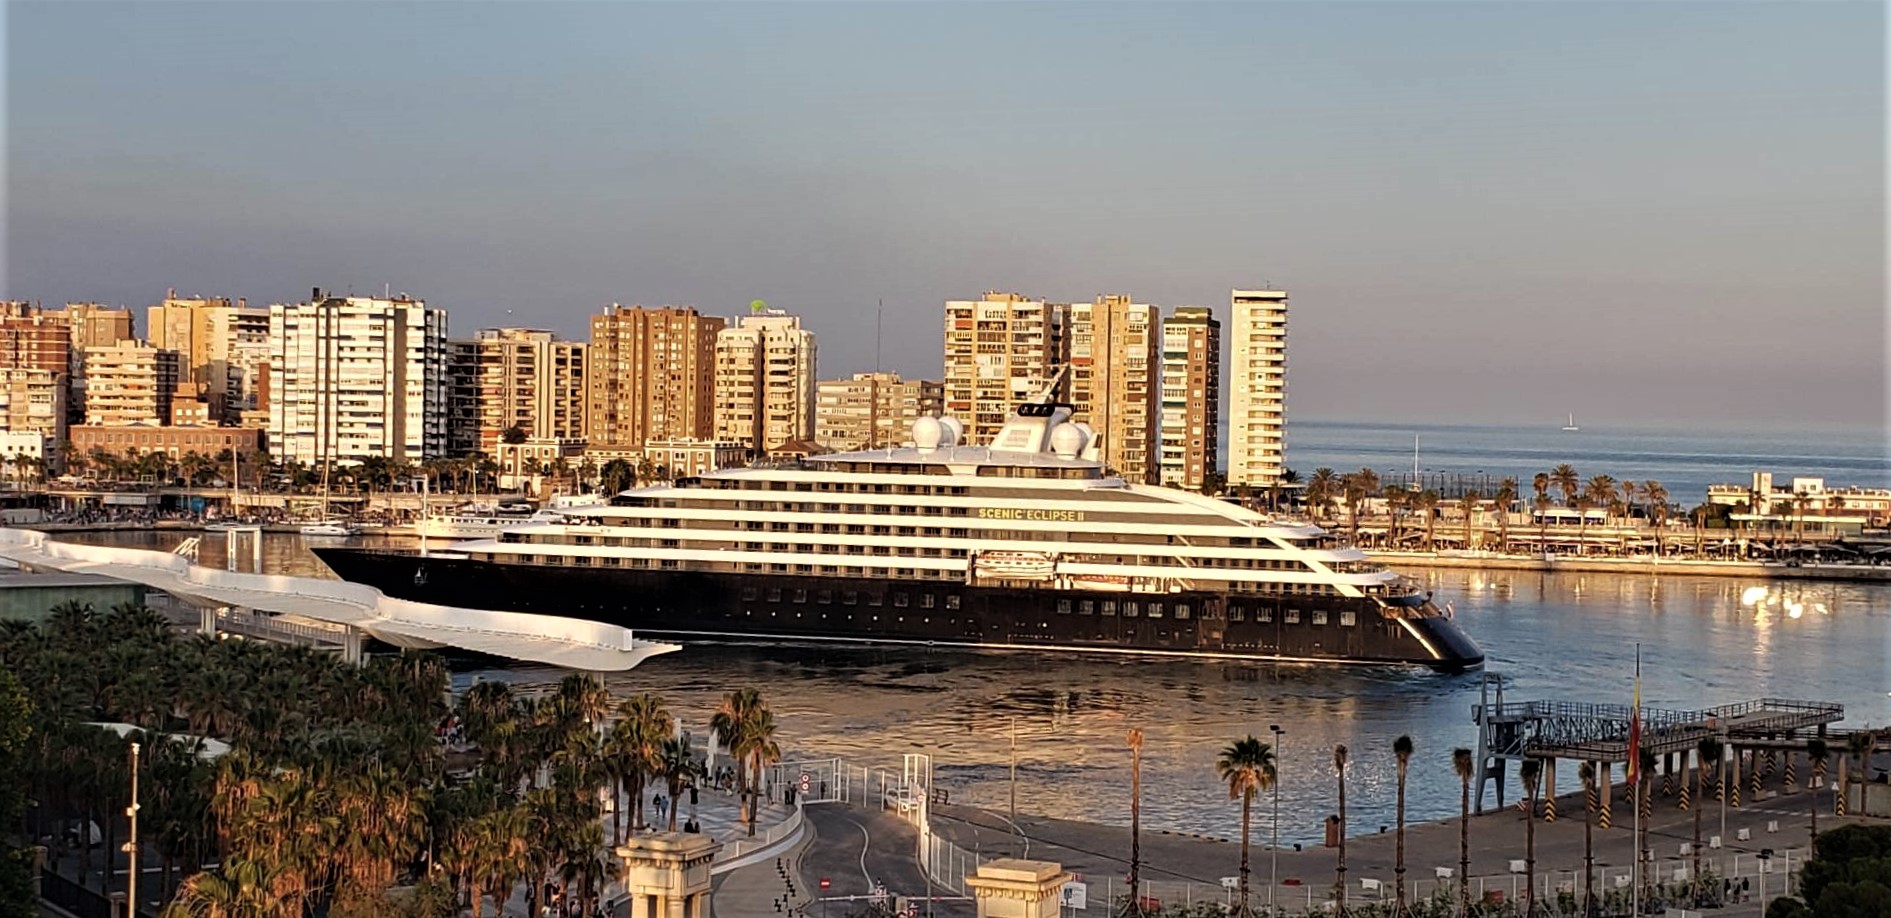 Scenic Eclipse II prepares to depart the Port of Malaga following its christening on Saturday